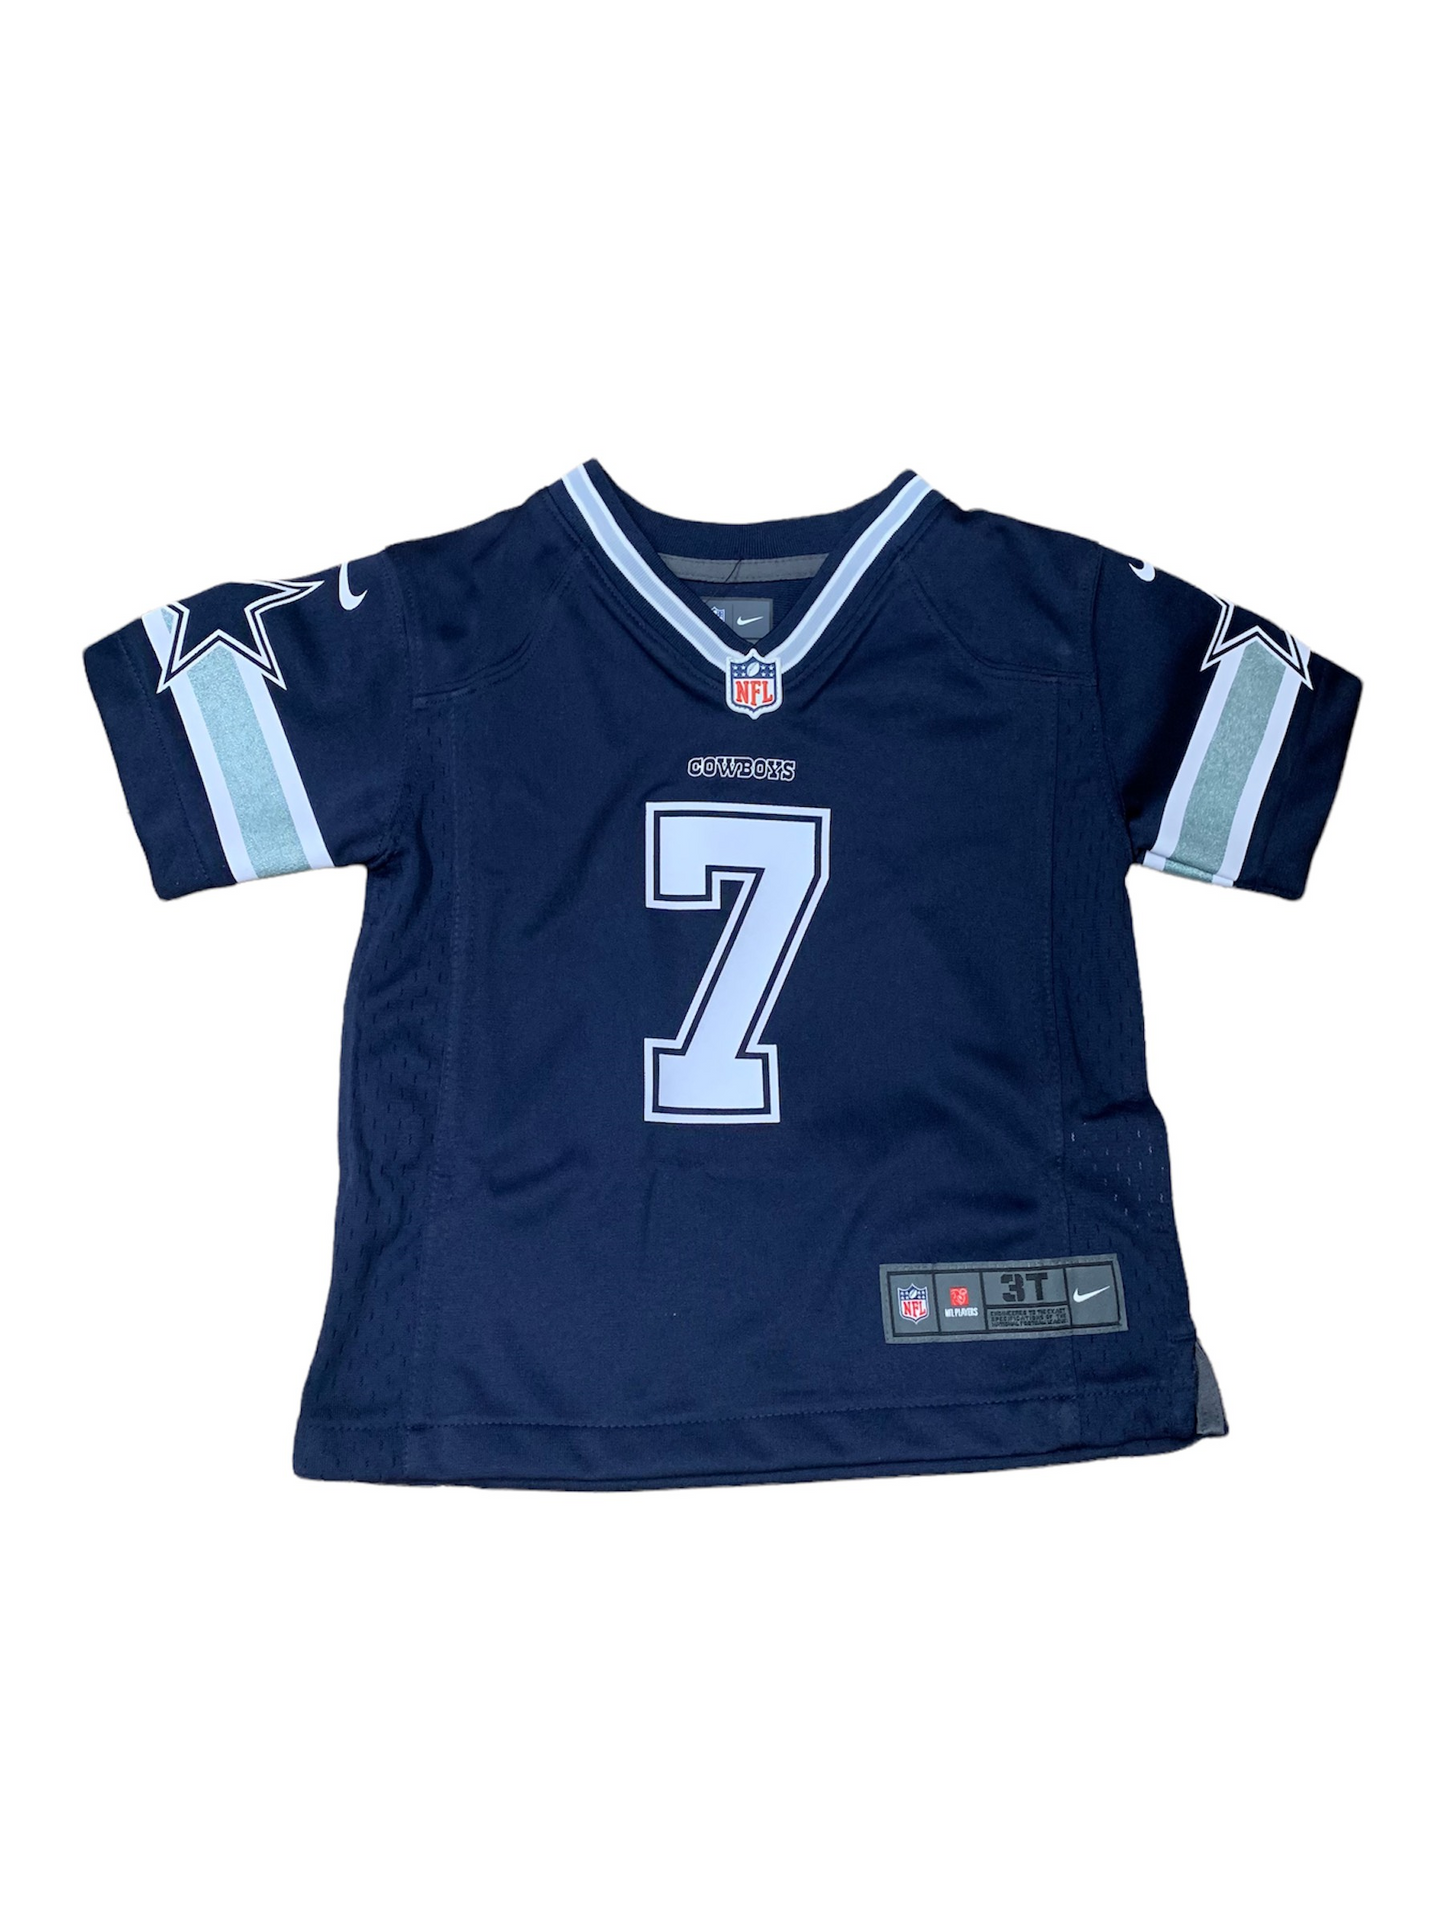 DALLAS COWBOYS INFANT TREVON DIGGS GAME JERSEY - NAVY – JR'S SPORTS